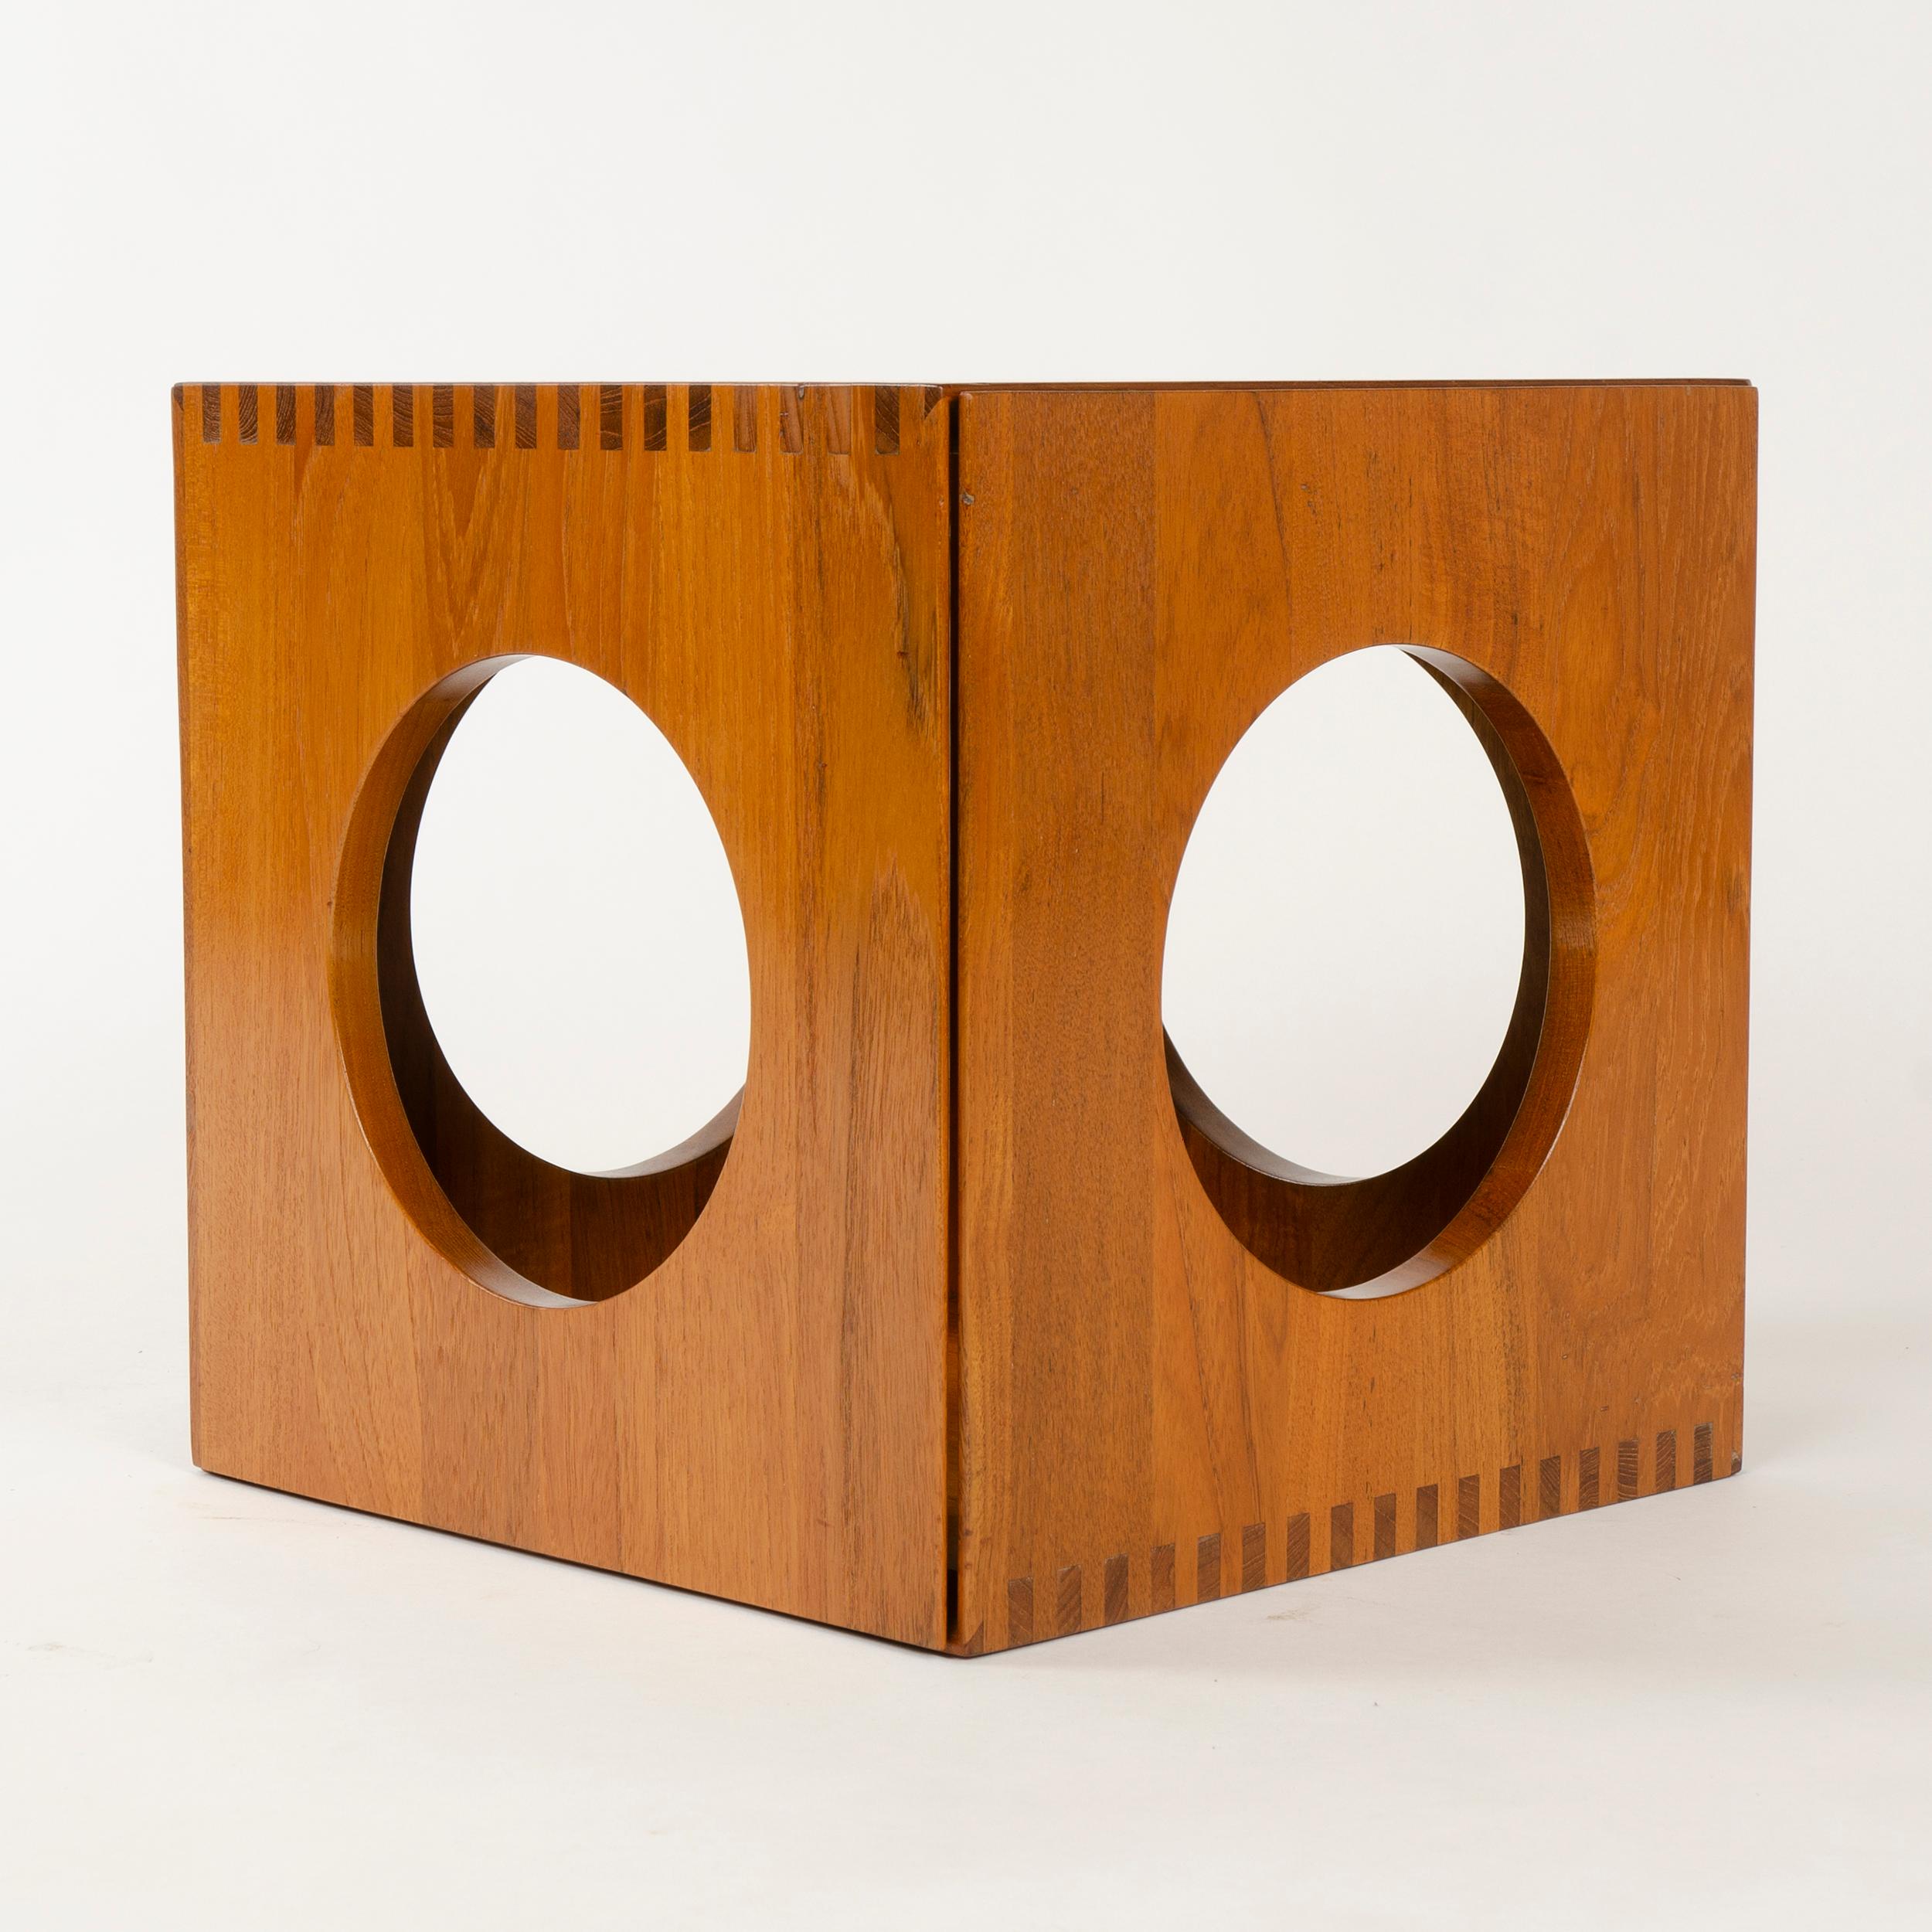 A pair of solid teak, finger-jointed end tables with round cutouts, which nest to form a cube.